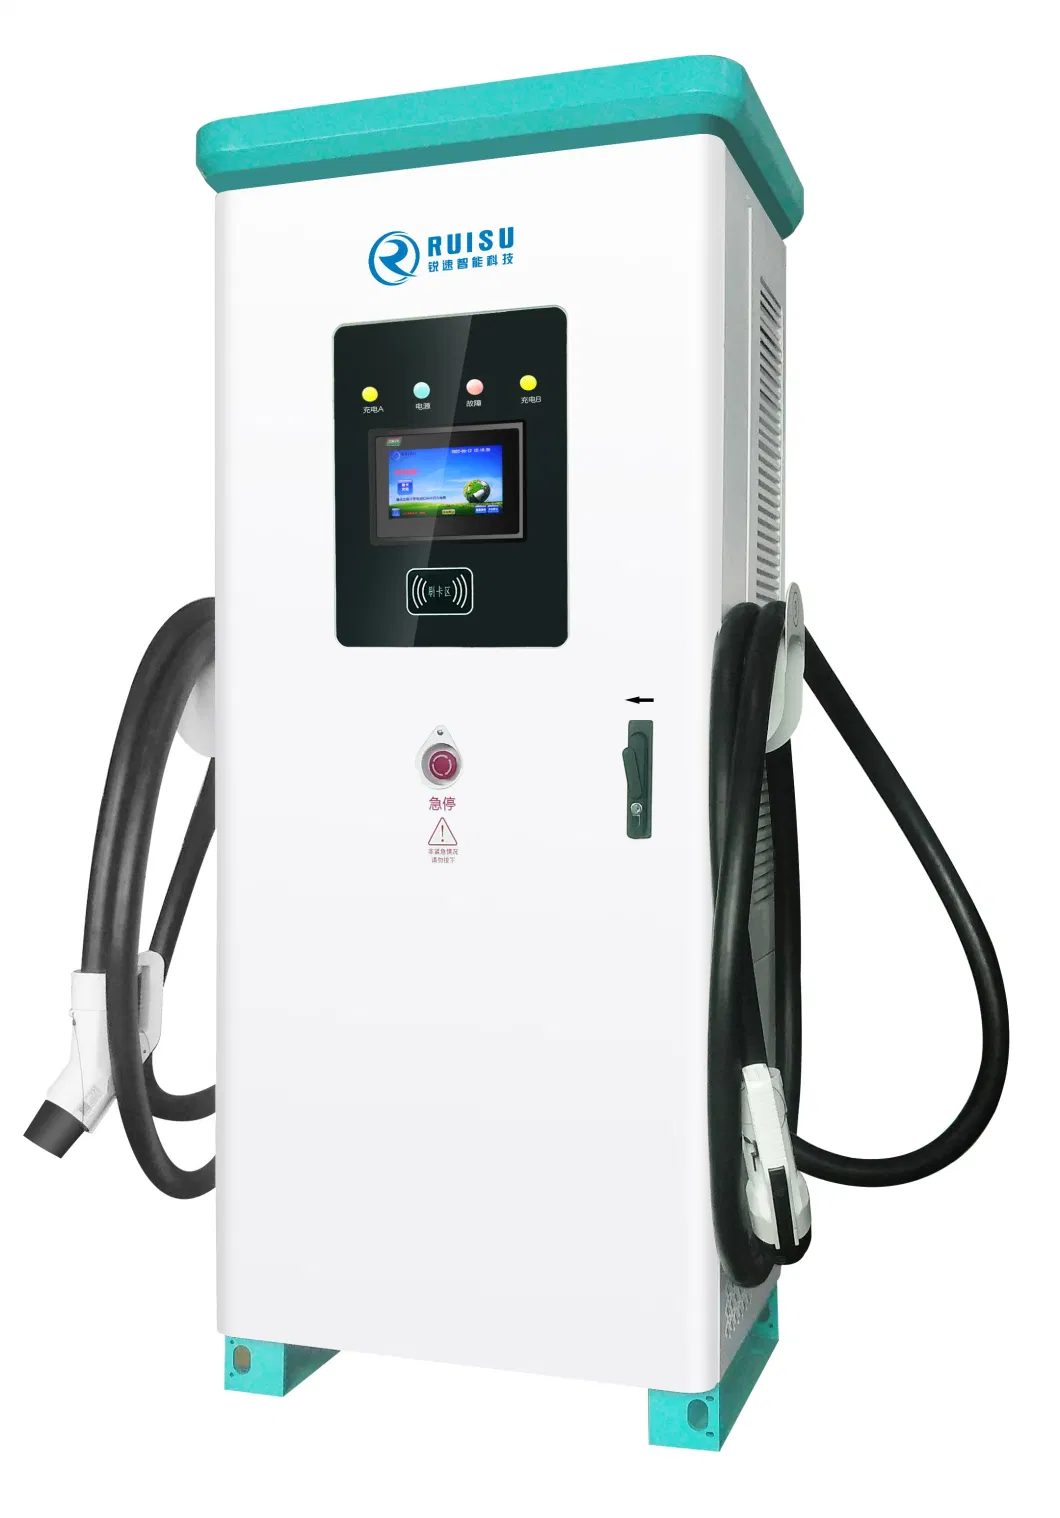 America Europe Standard Electric Vehicle Manufacturer of DC Charging Station 150-180kw CCS1 CCS2 Super Fast EV Charger with 480 Volt 200 AMP 60Hz Charging Pile